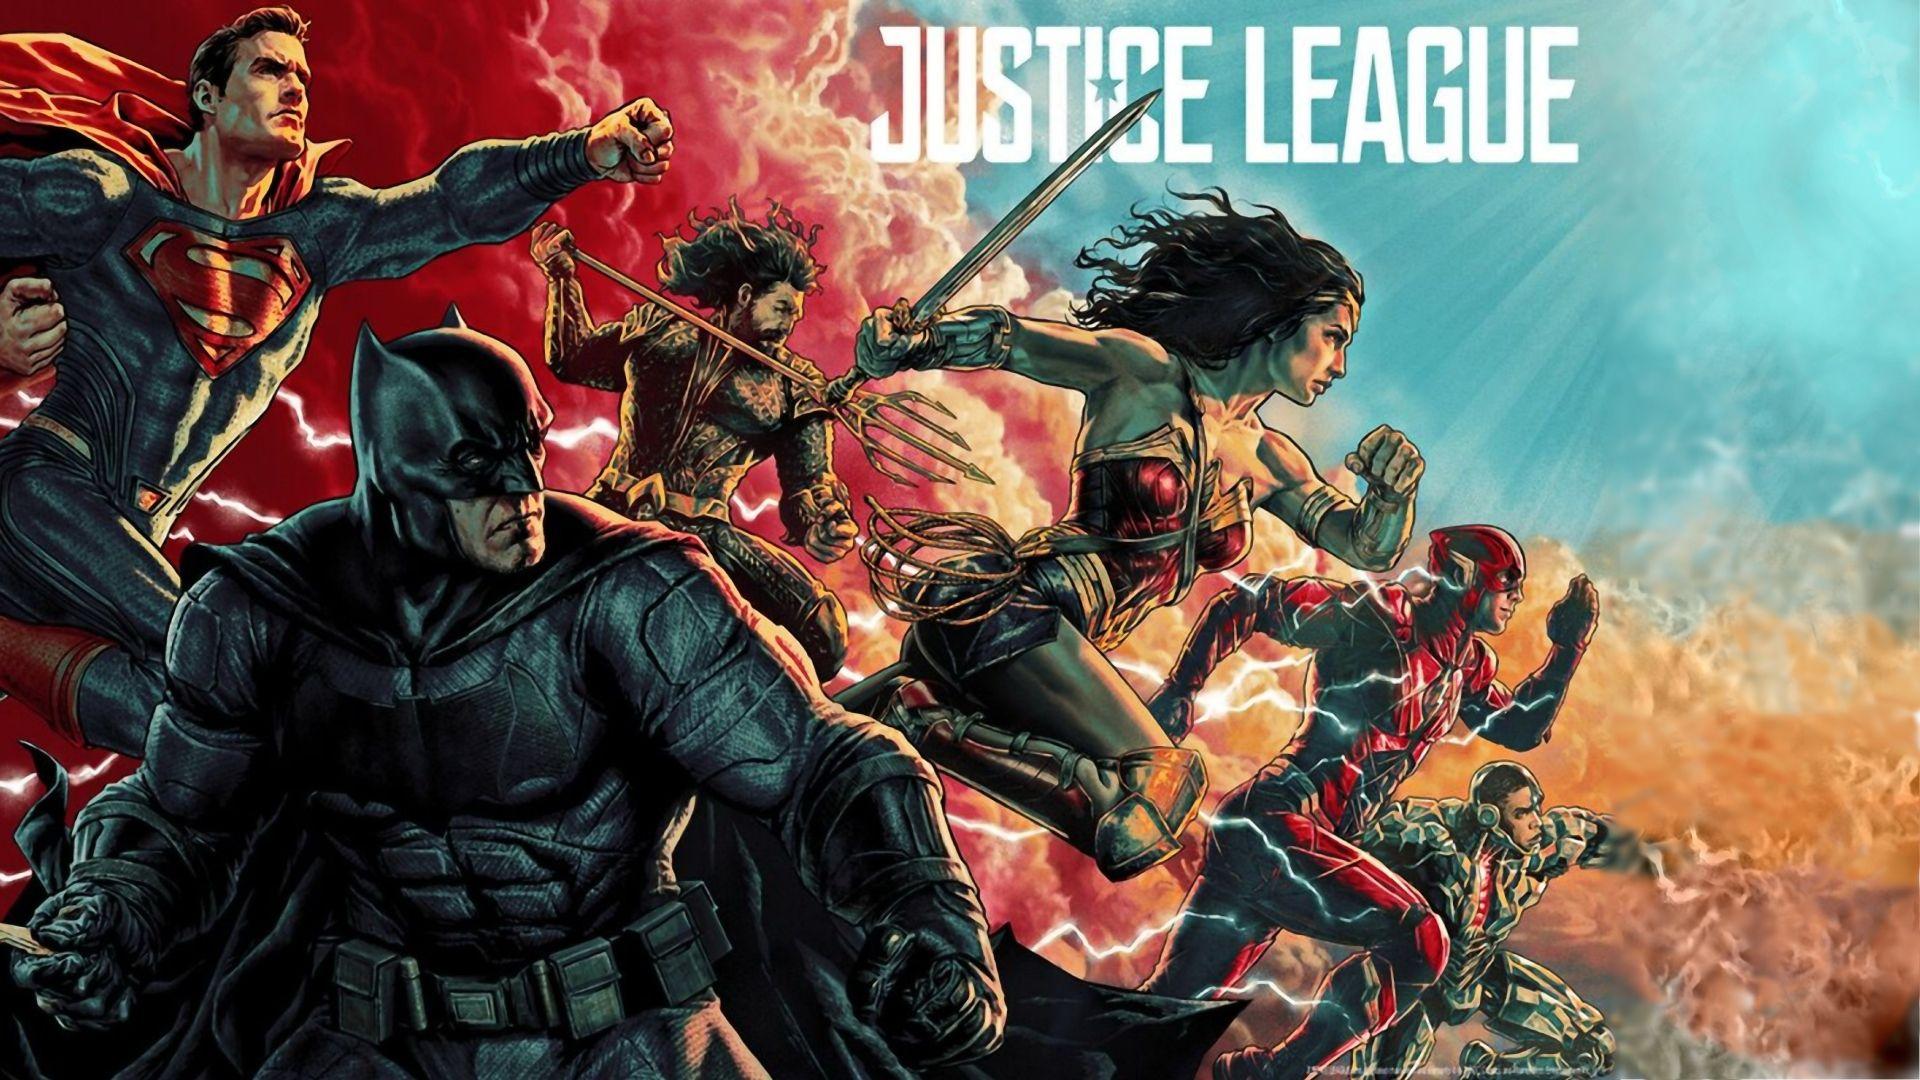 Justice League Hd Wallpapers Top Free Justice League Hd Backgrounds Wallpaperaccess 